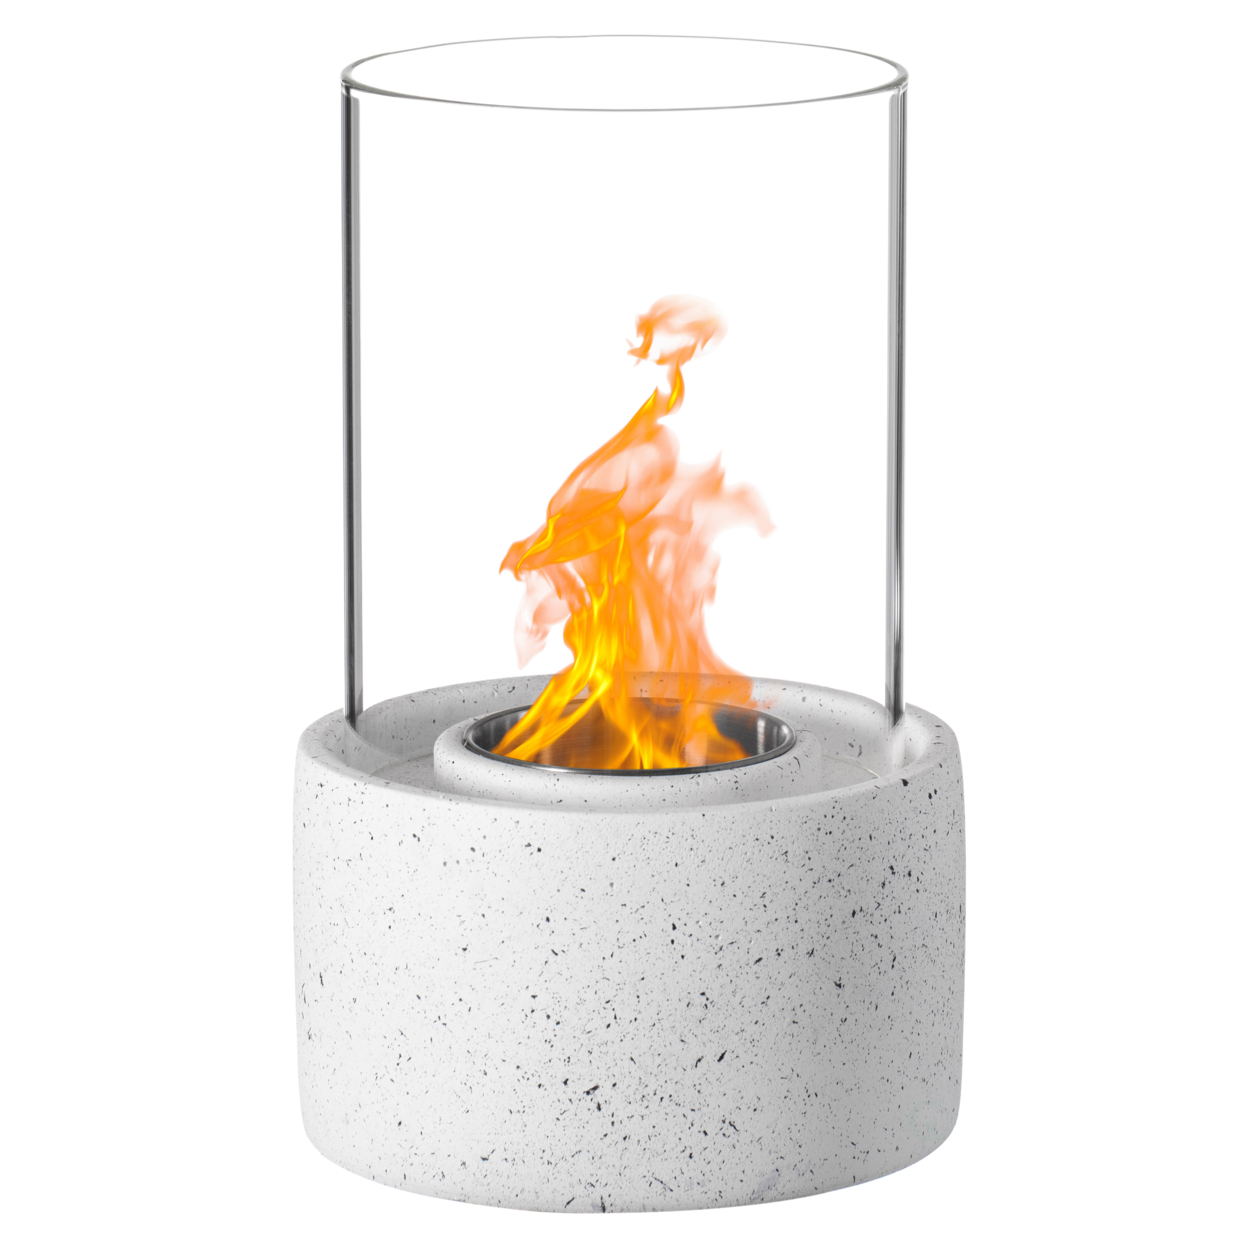 Mini Tabletop Fire Pit Rubbing Alcohol Fireplace Indoor Outdoor Portable Fire Concrete Bowl Pot Fireplace - High Glass